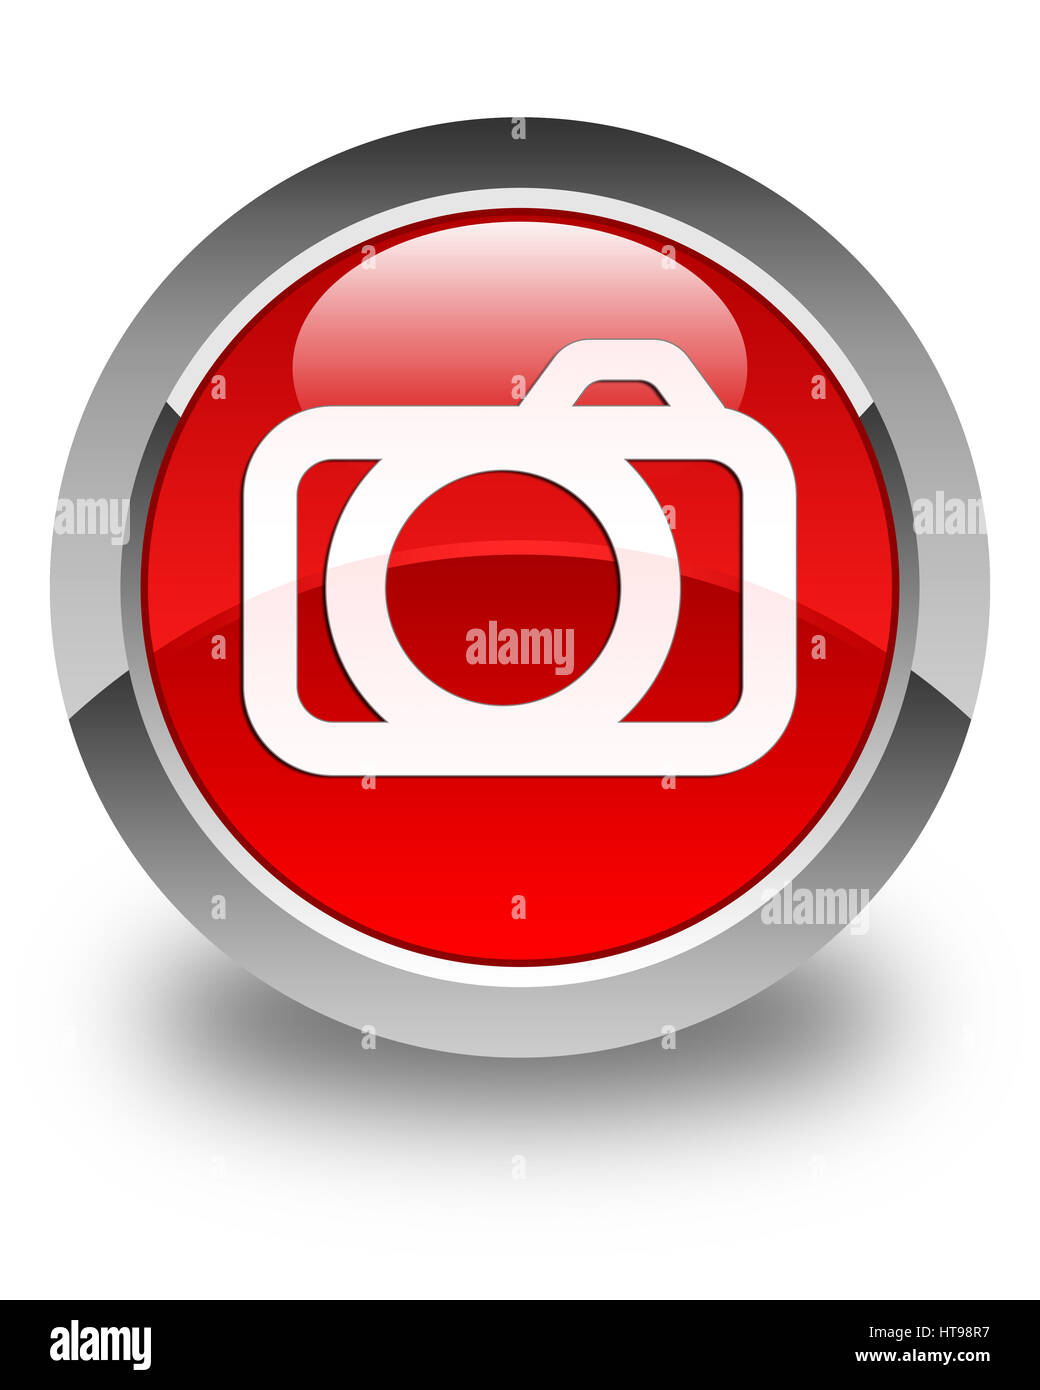 Camera icon isolated on glossy red round button abstract illustration Stock Photo